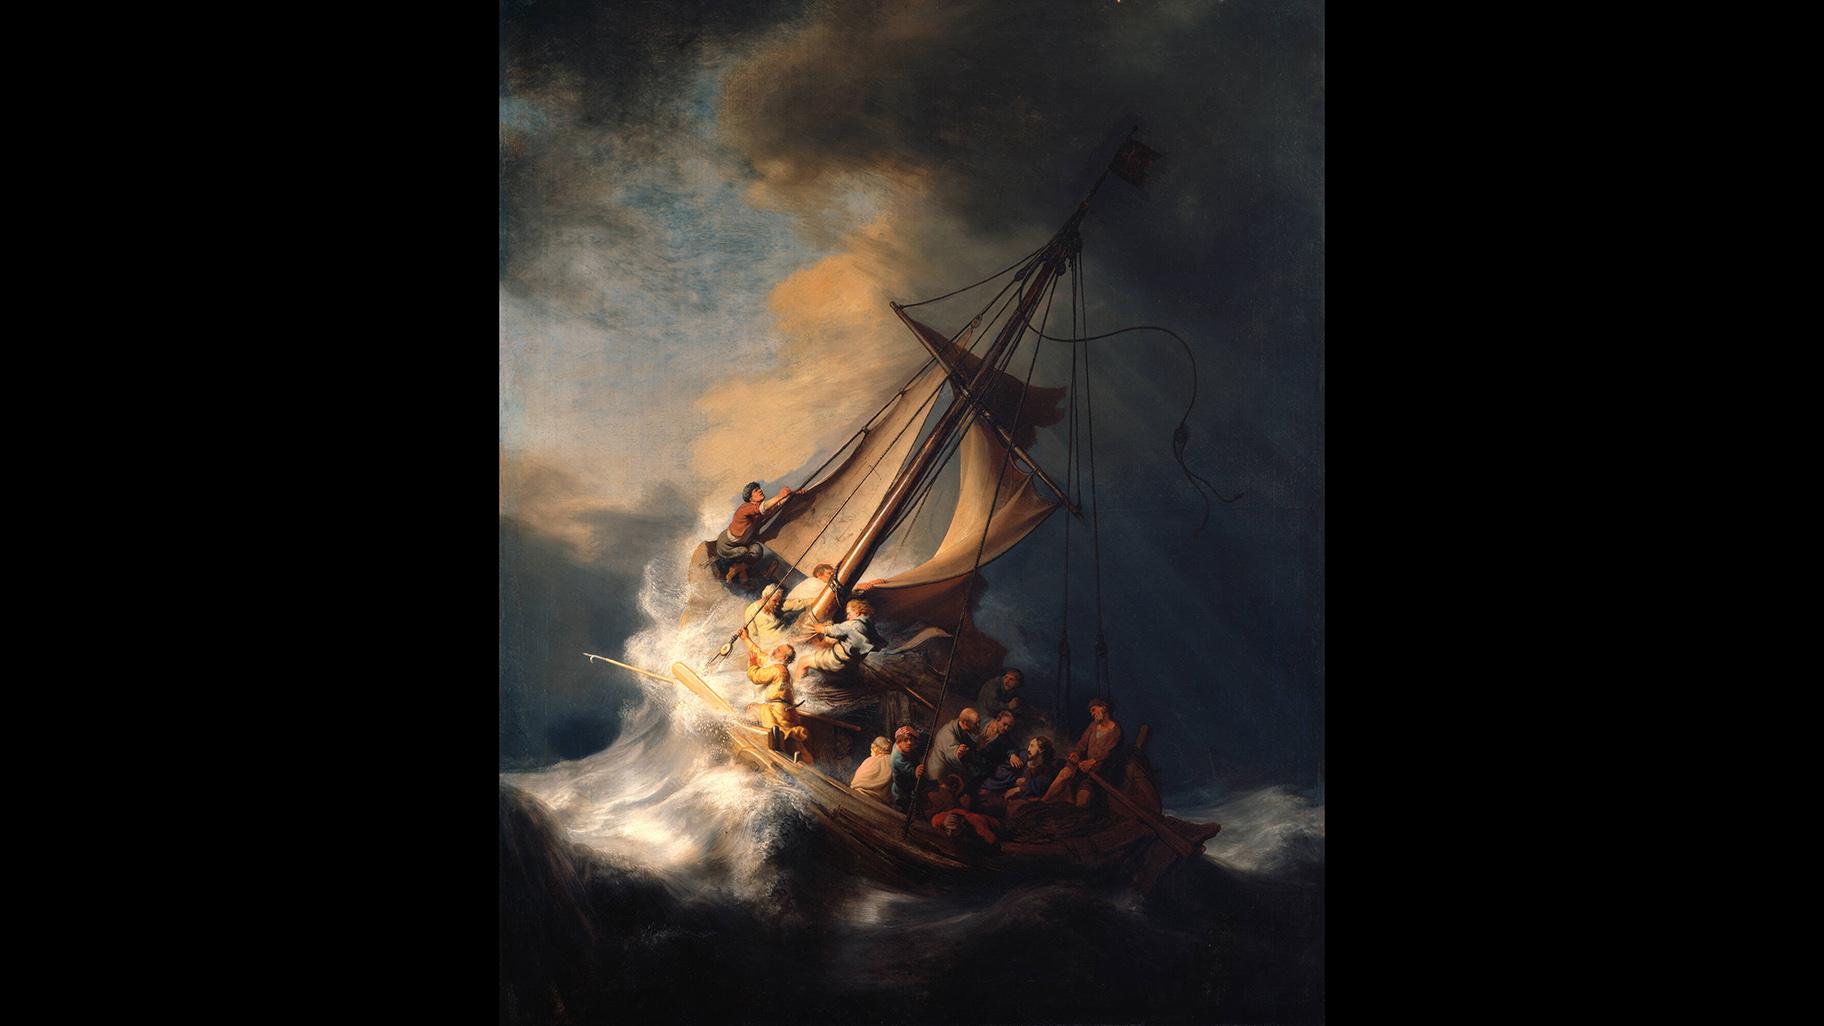 Rembrandt van Rijn, “Christ In The Storm On The Sea Of Galilee,” 1633.